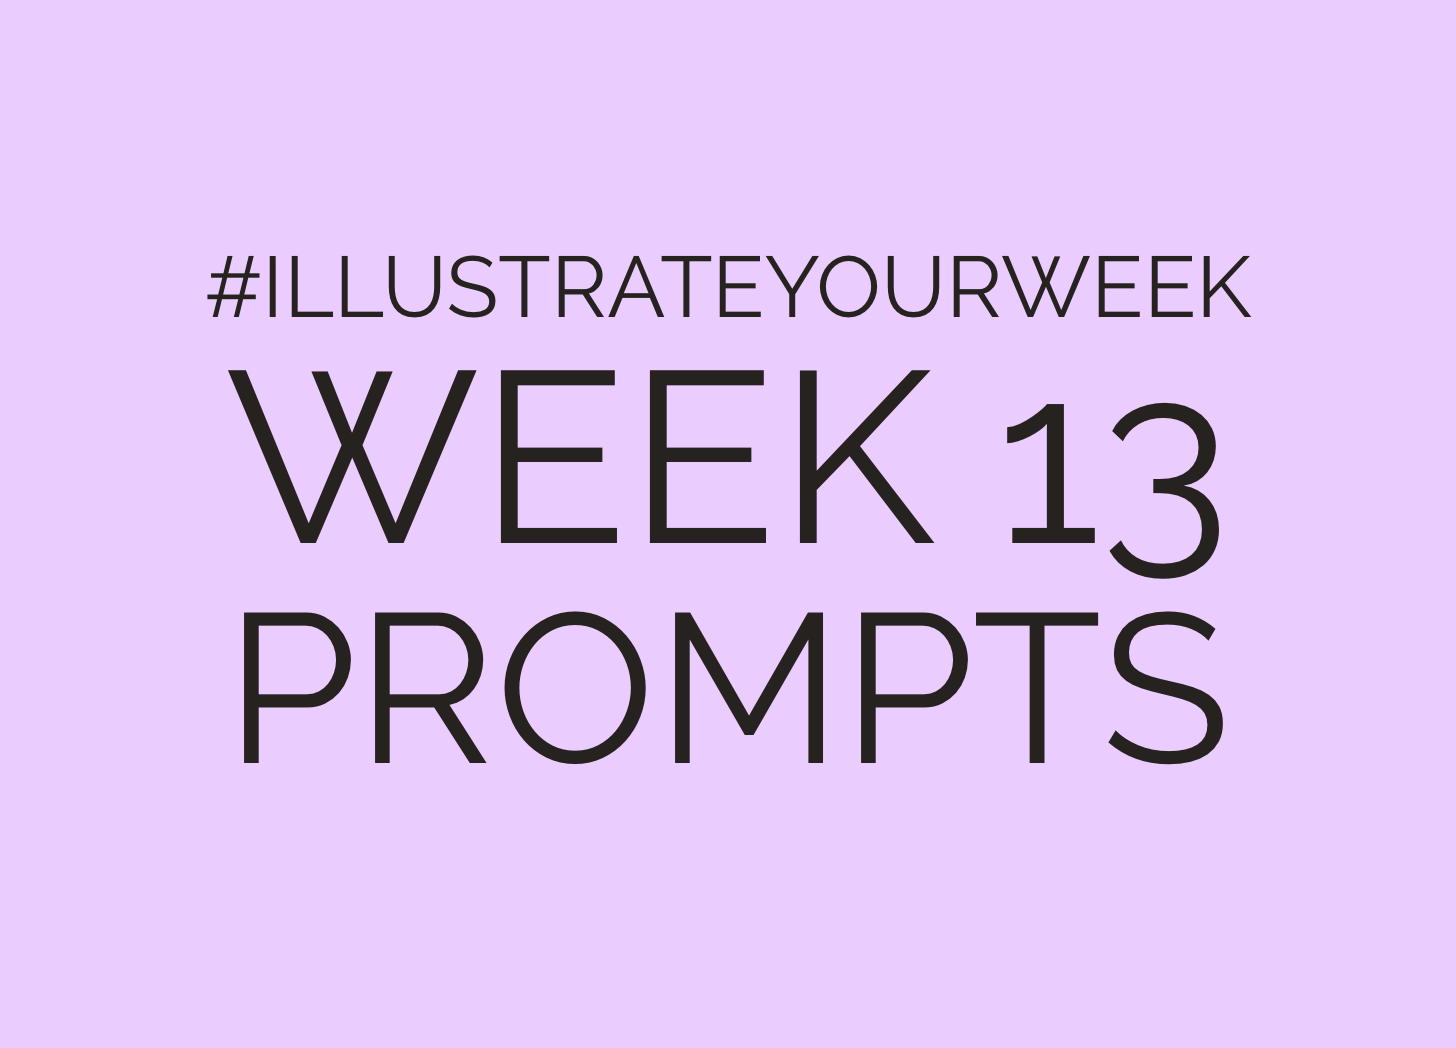 Prompts for Week 13 - heading